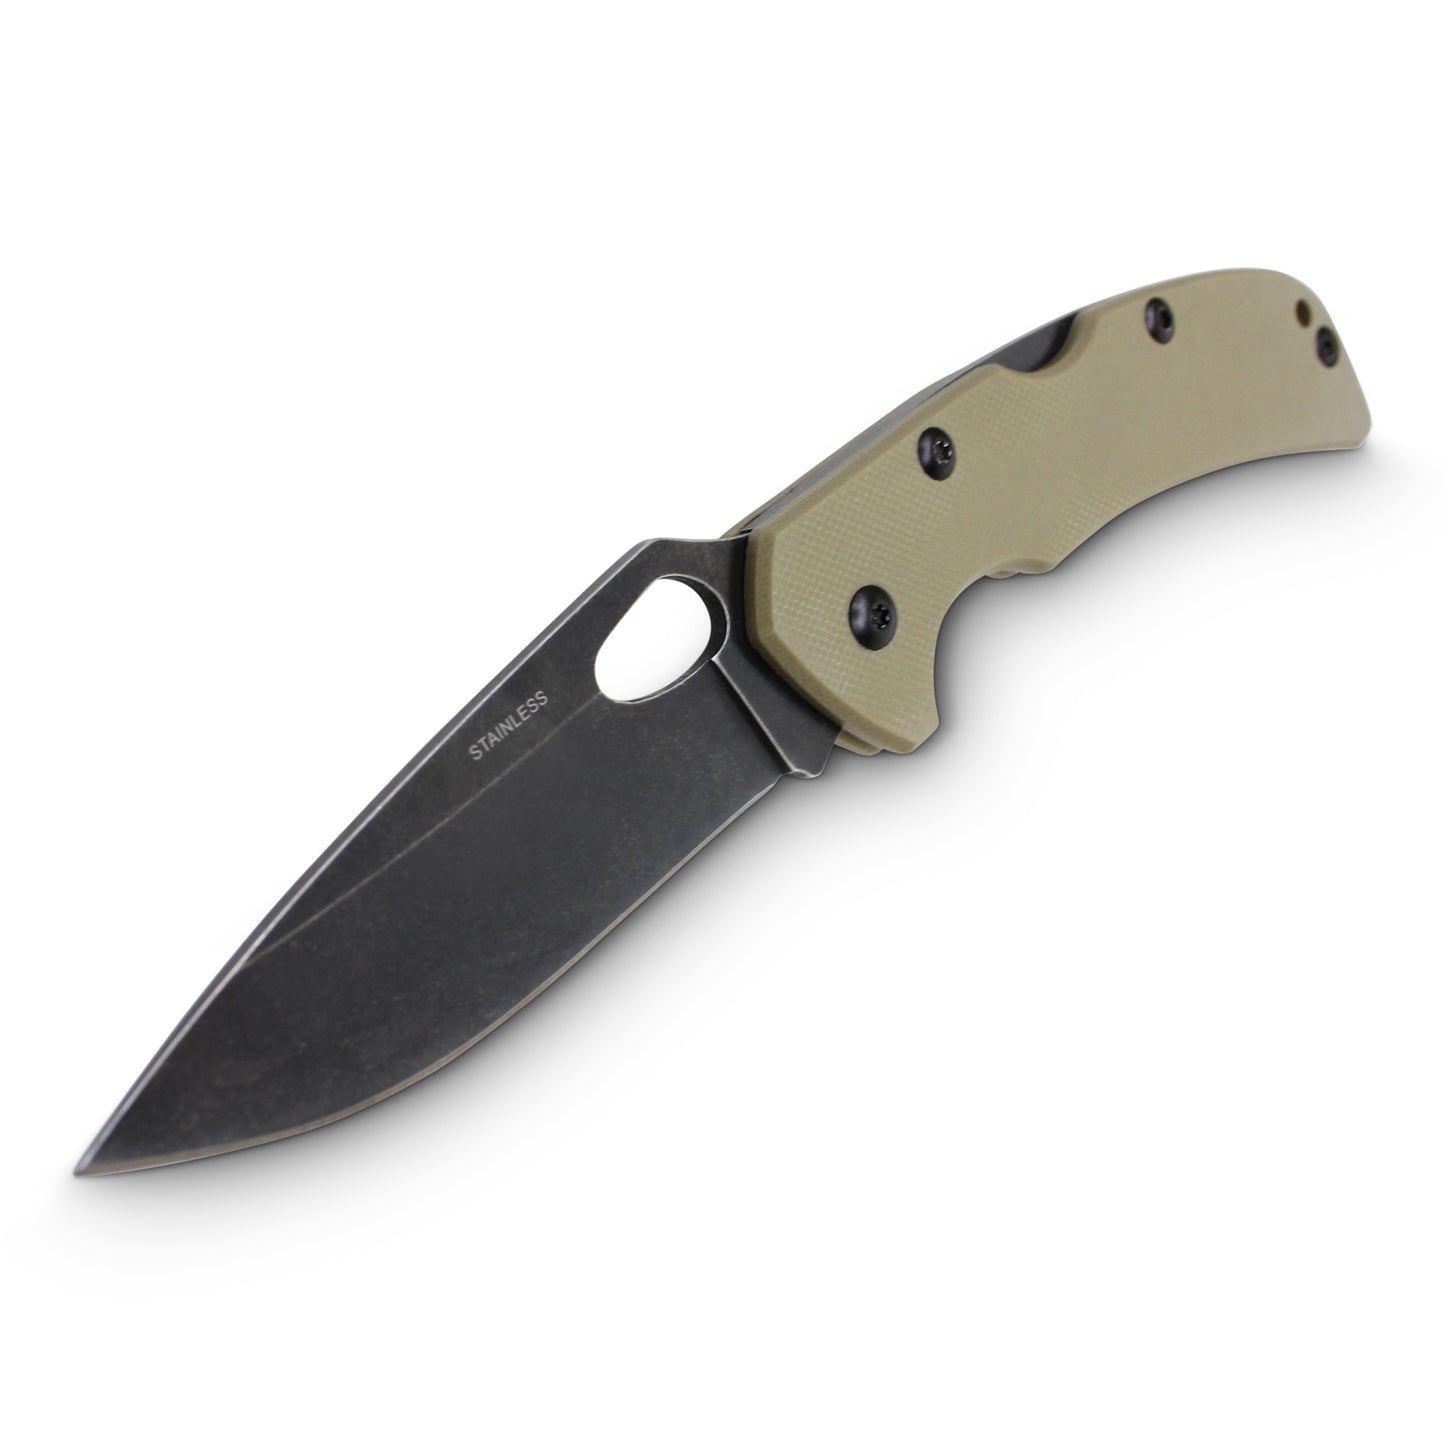 Xhunter Cobra Desert Rat Drop Point Blade Folding Knife - Coyote Tan 7.8 Inch Overall #kf0306 Rosy Brown